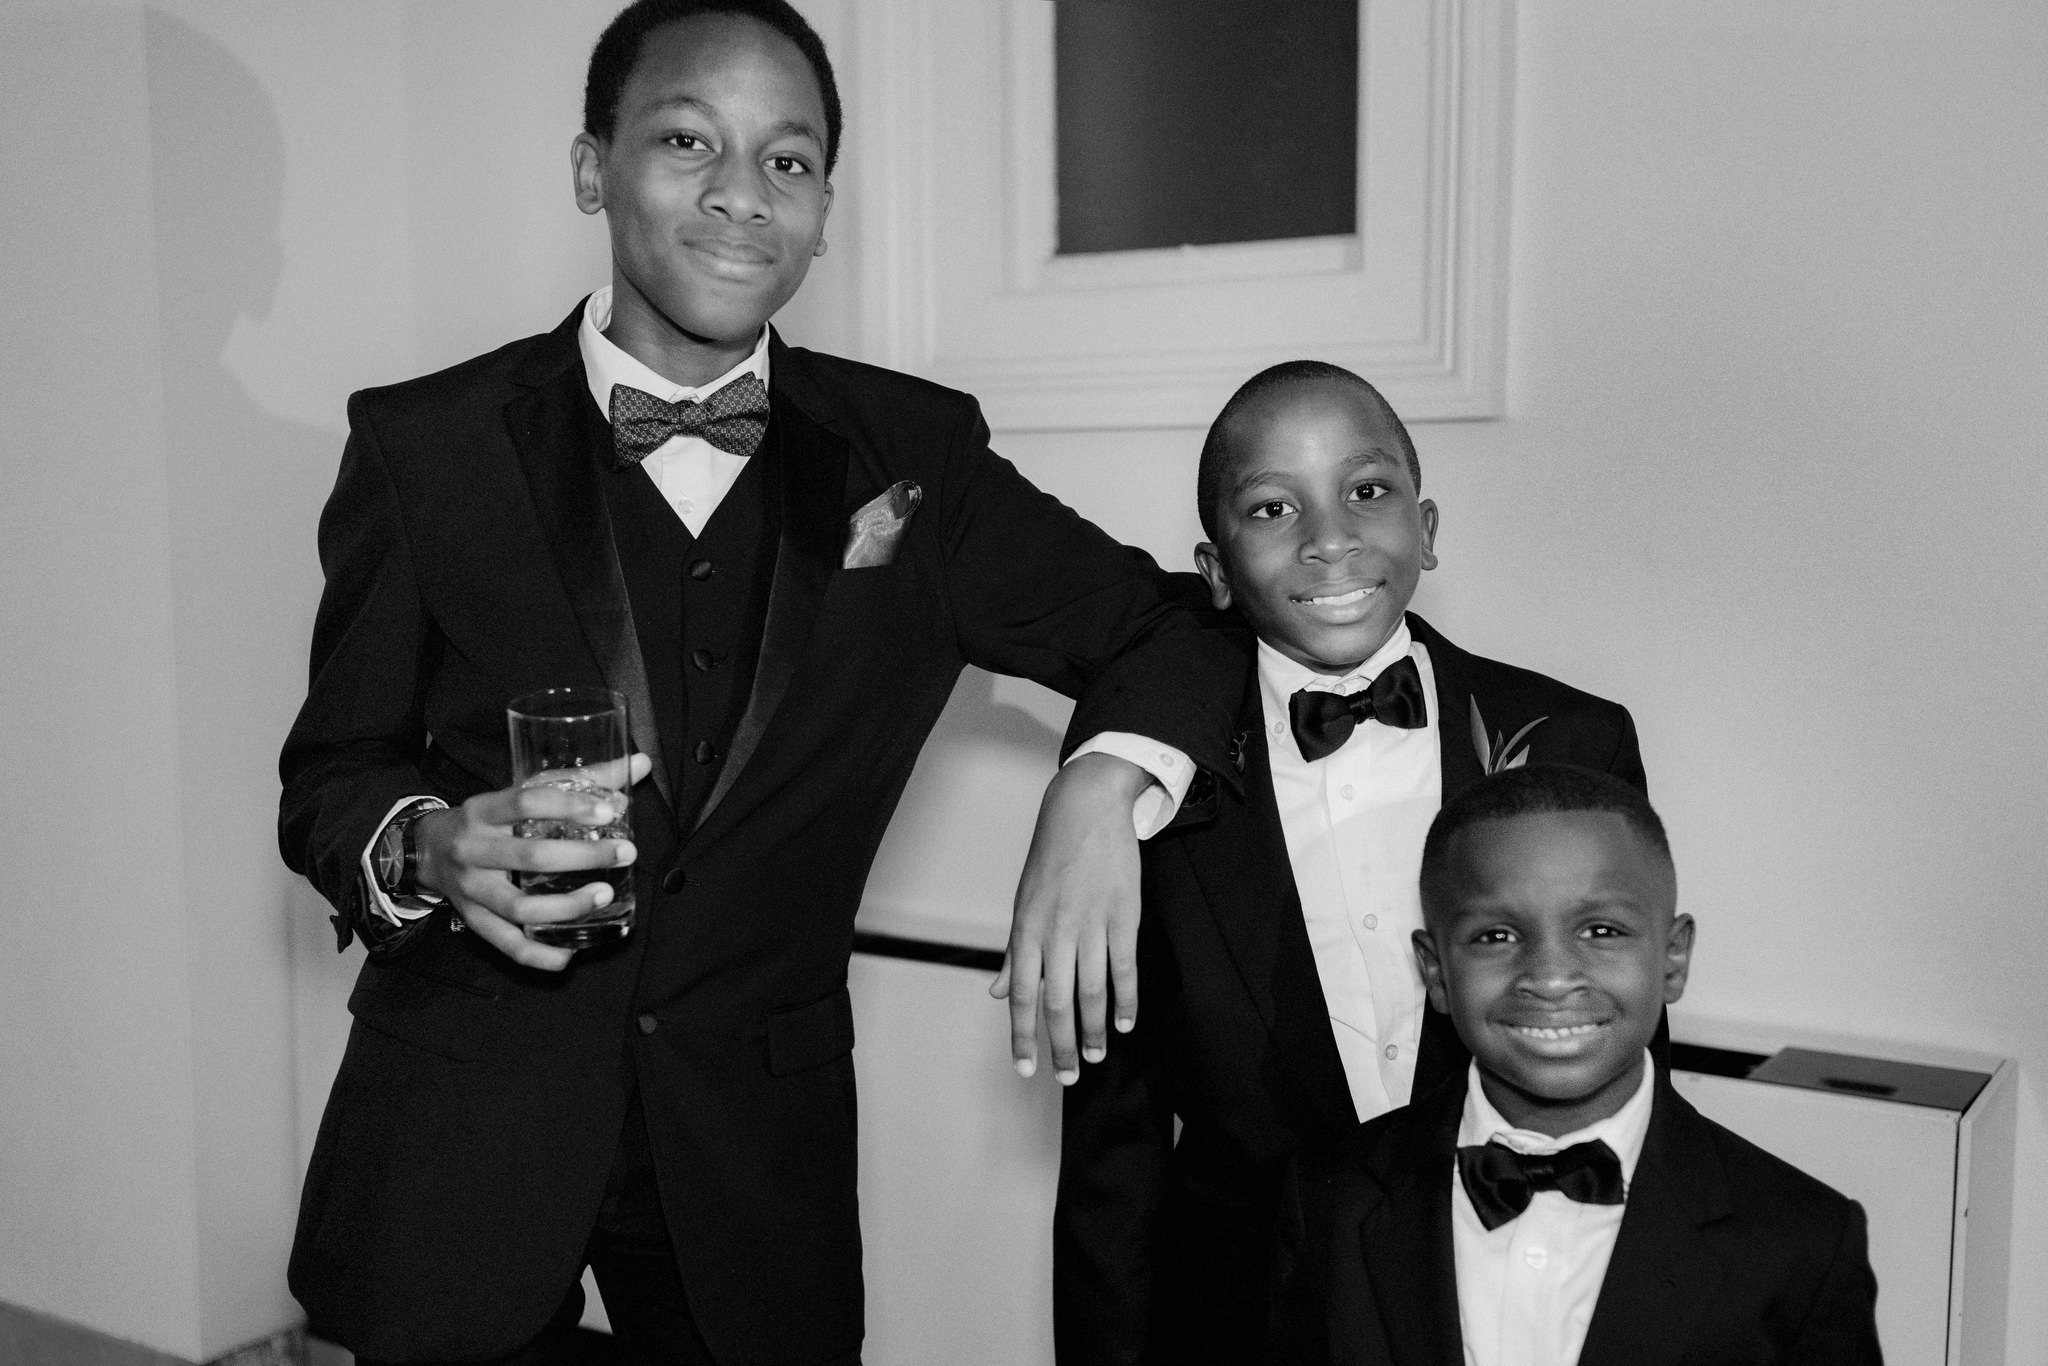 Three young boys smiling while wearing suits during a wedding at the Providence Public Library in Rhode Island